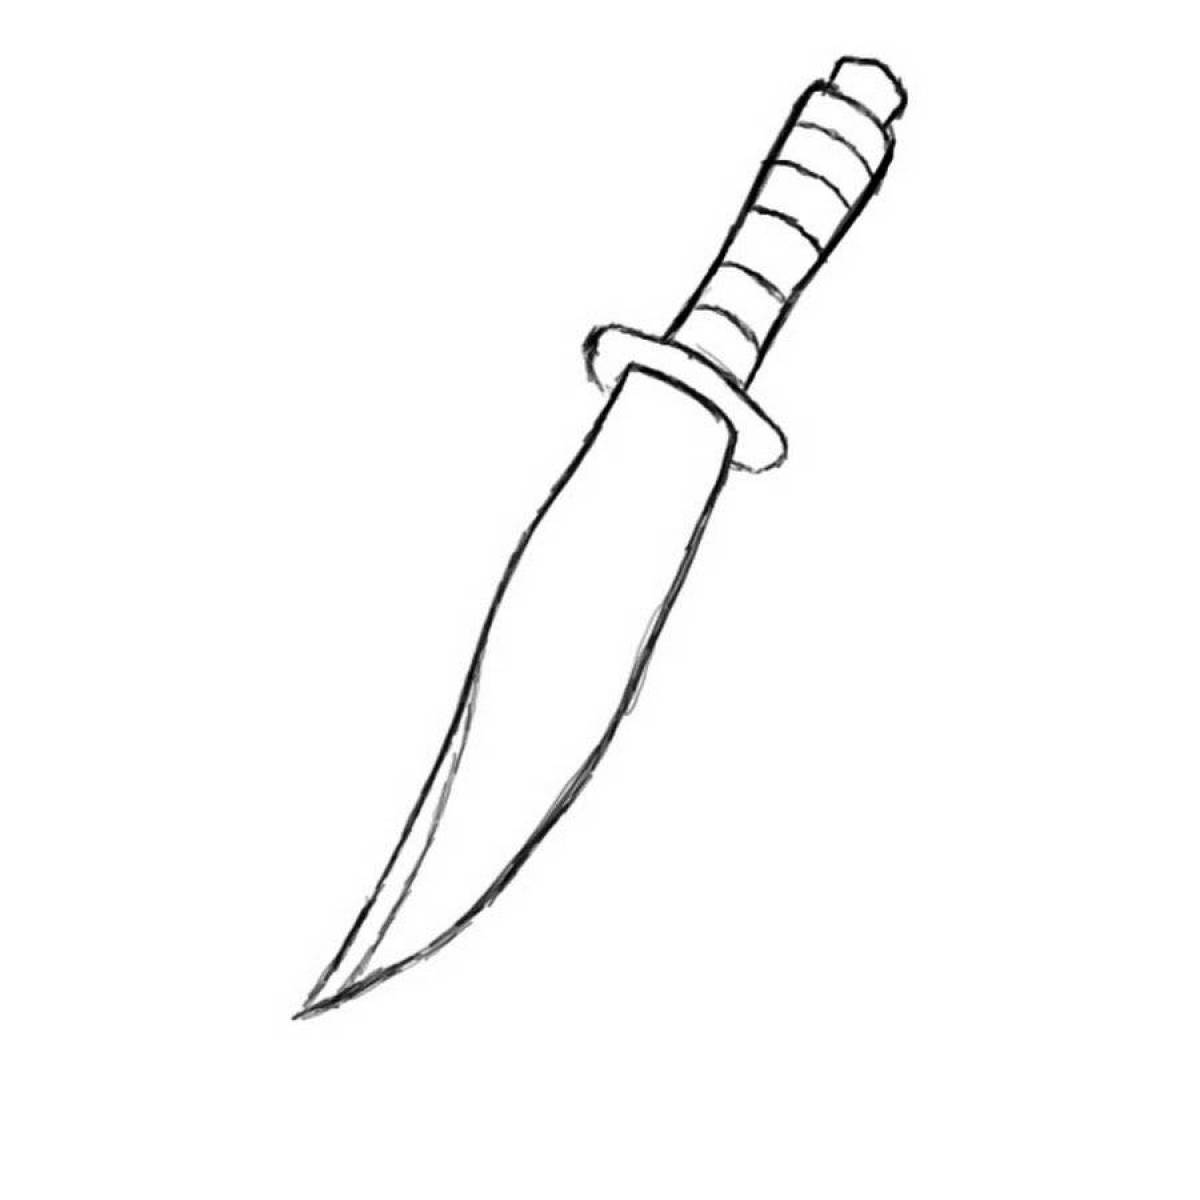 Coloring page graceful knife